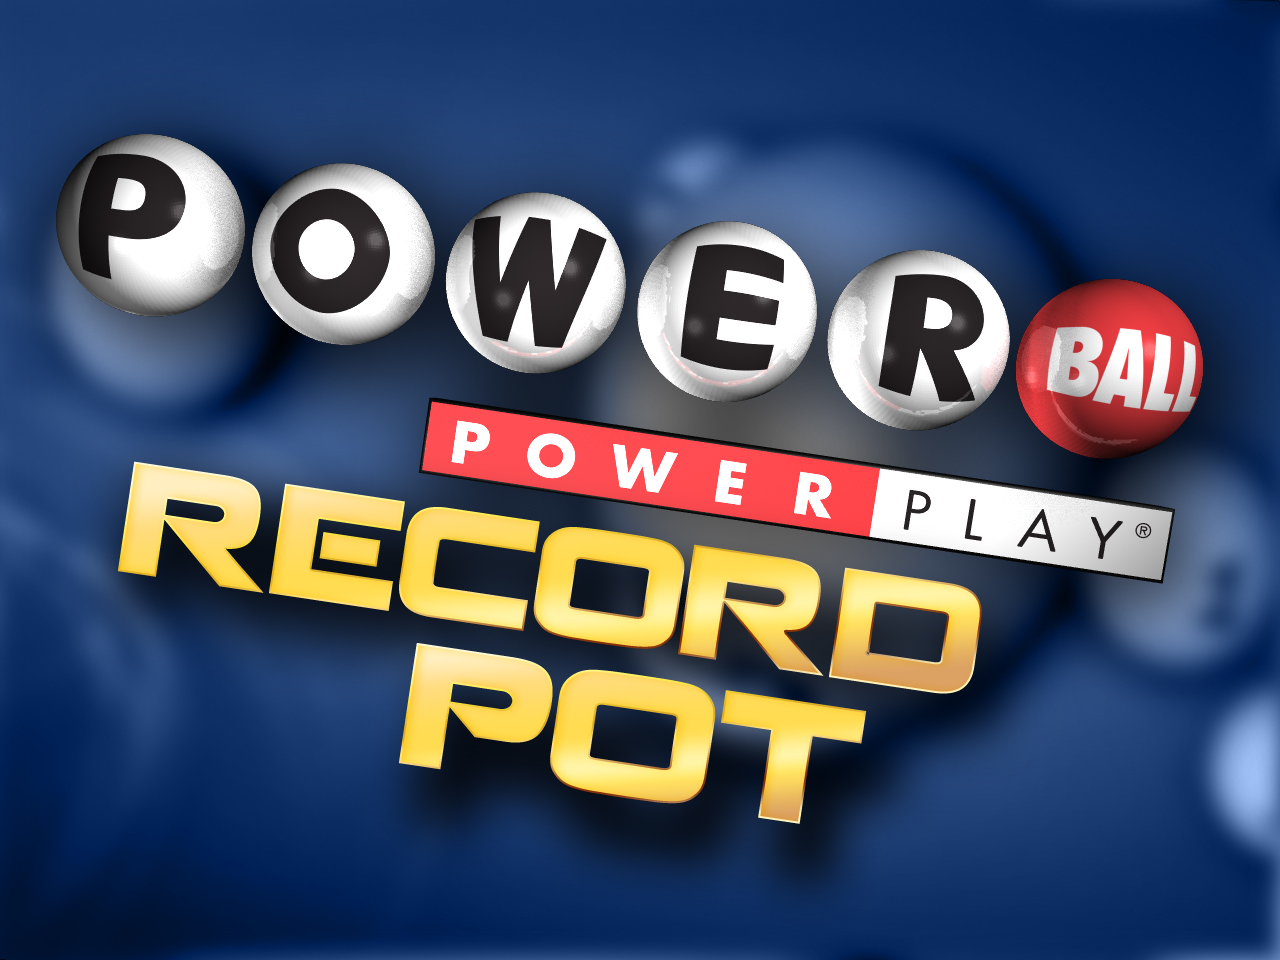 Record Powerball Jackpot Dilemma: Buy Ticket or Gas? – In The Noozroom